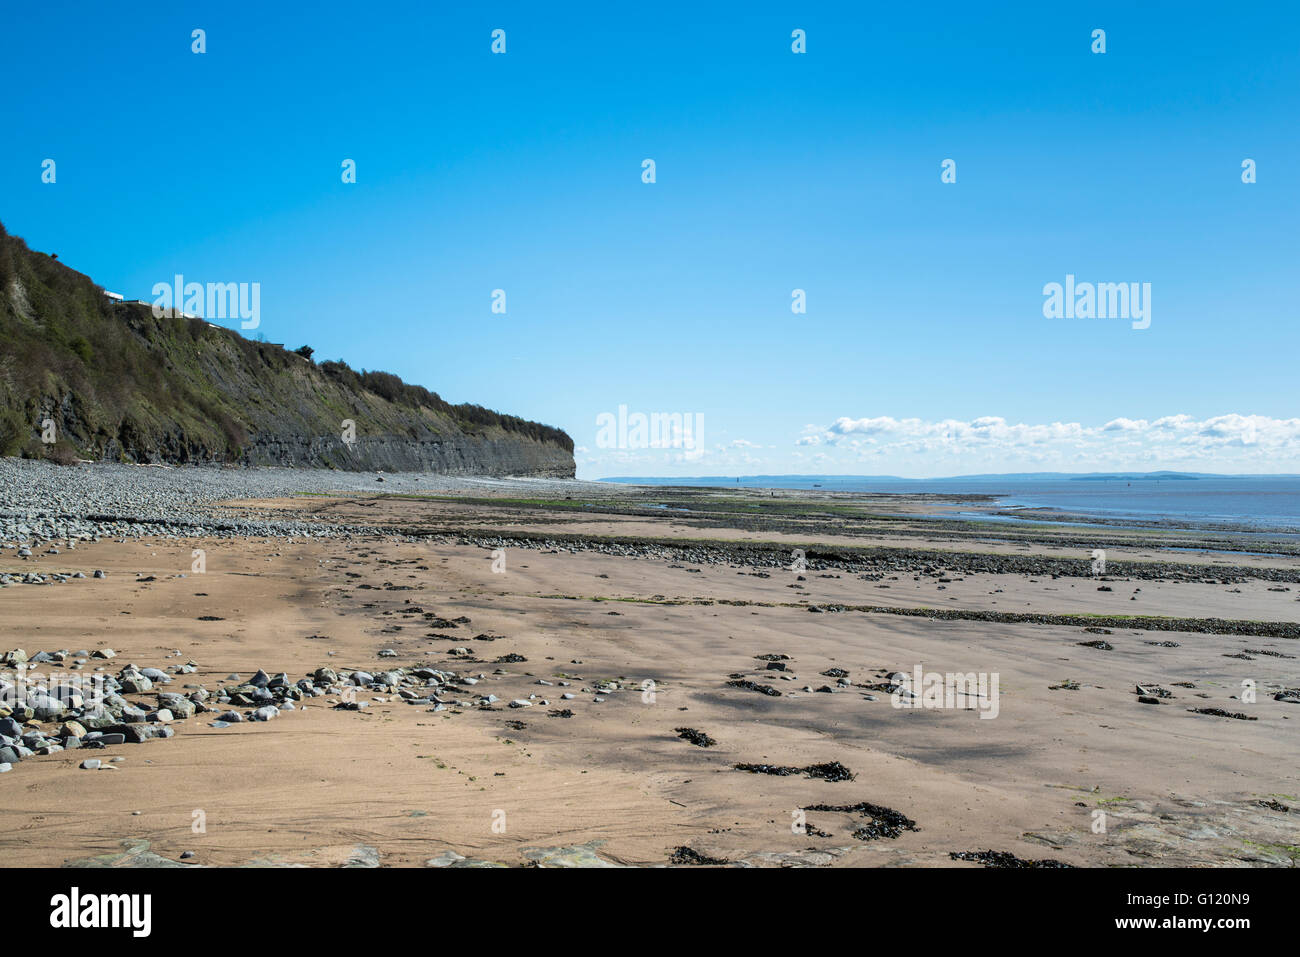 A sand and pebble beach below a headland. Stock Photo